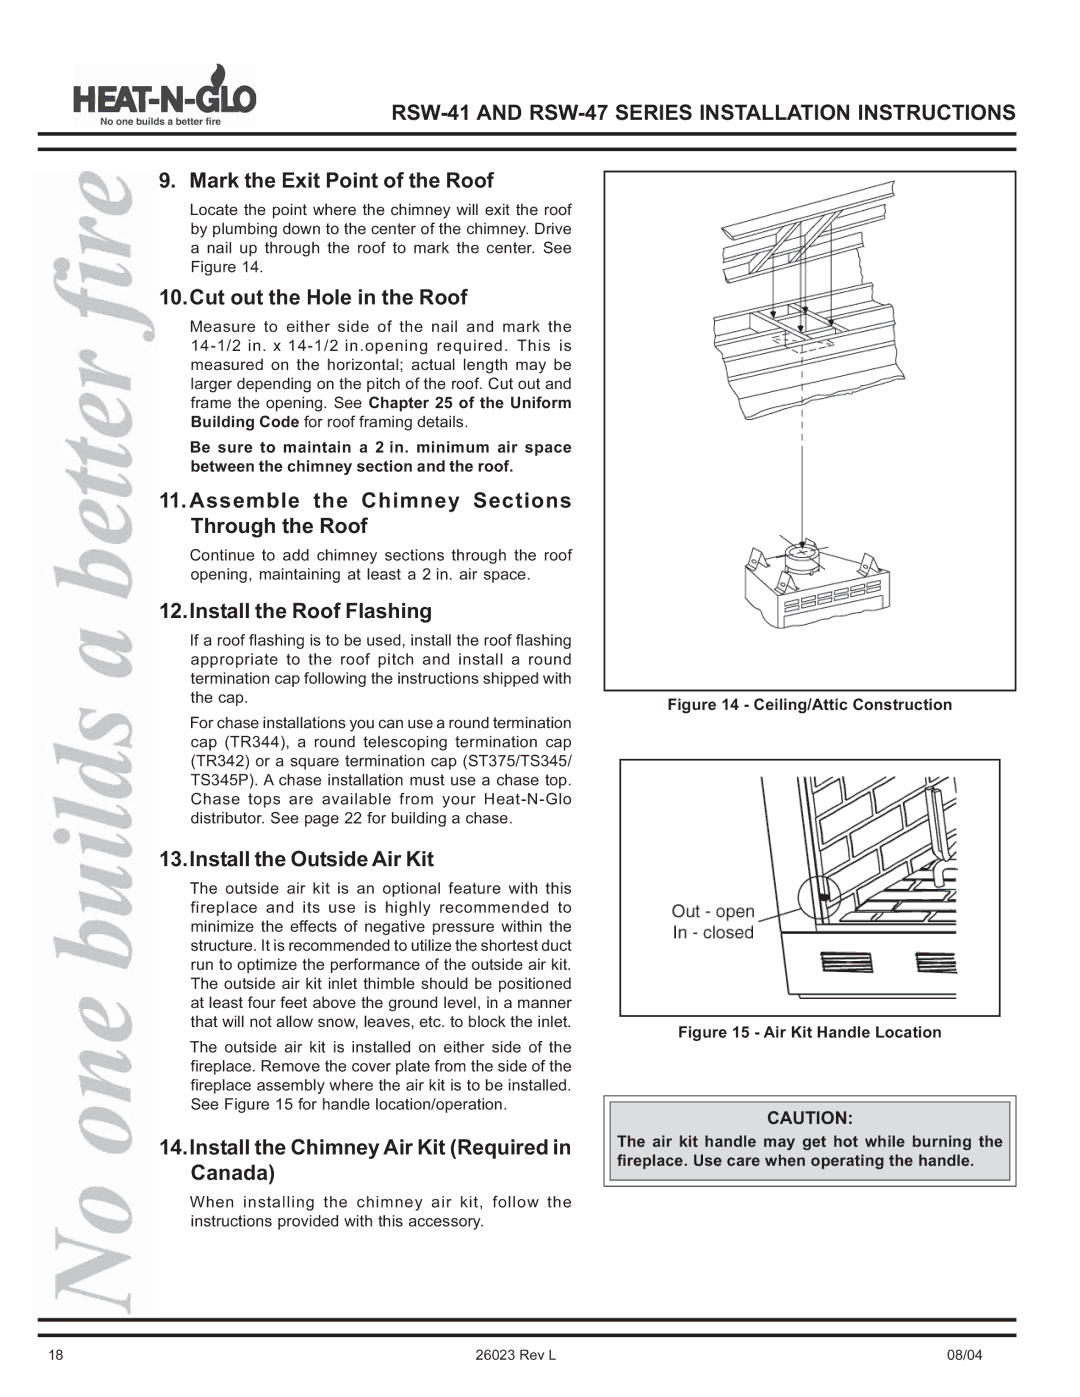 Hearth and Home Technologies RSW-41, RSW-47 manual Mark the Exit Point of the Roof, Cut out the Hole in the Roof 